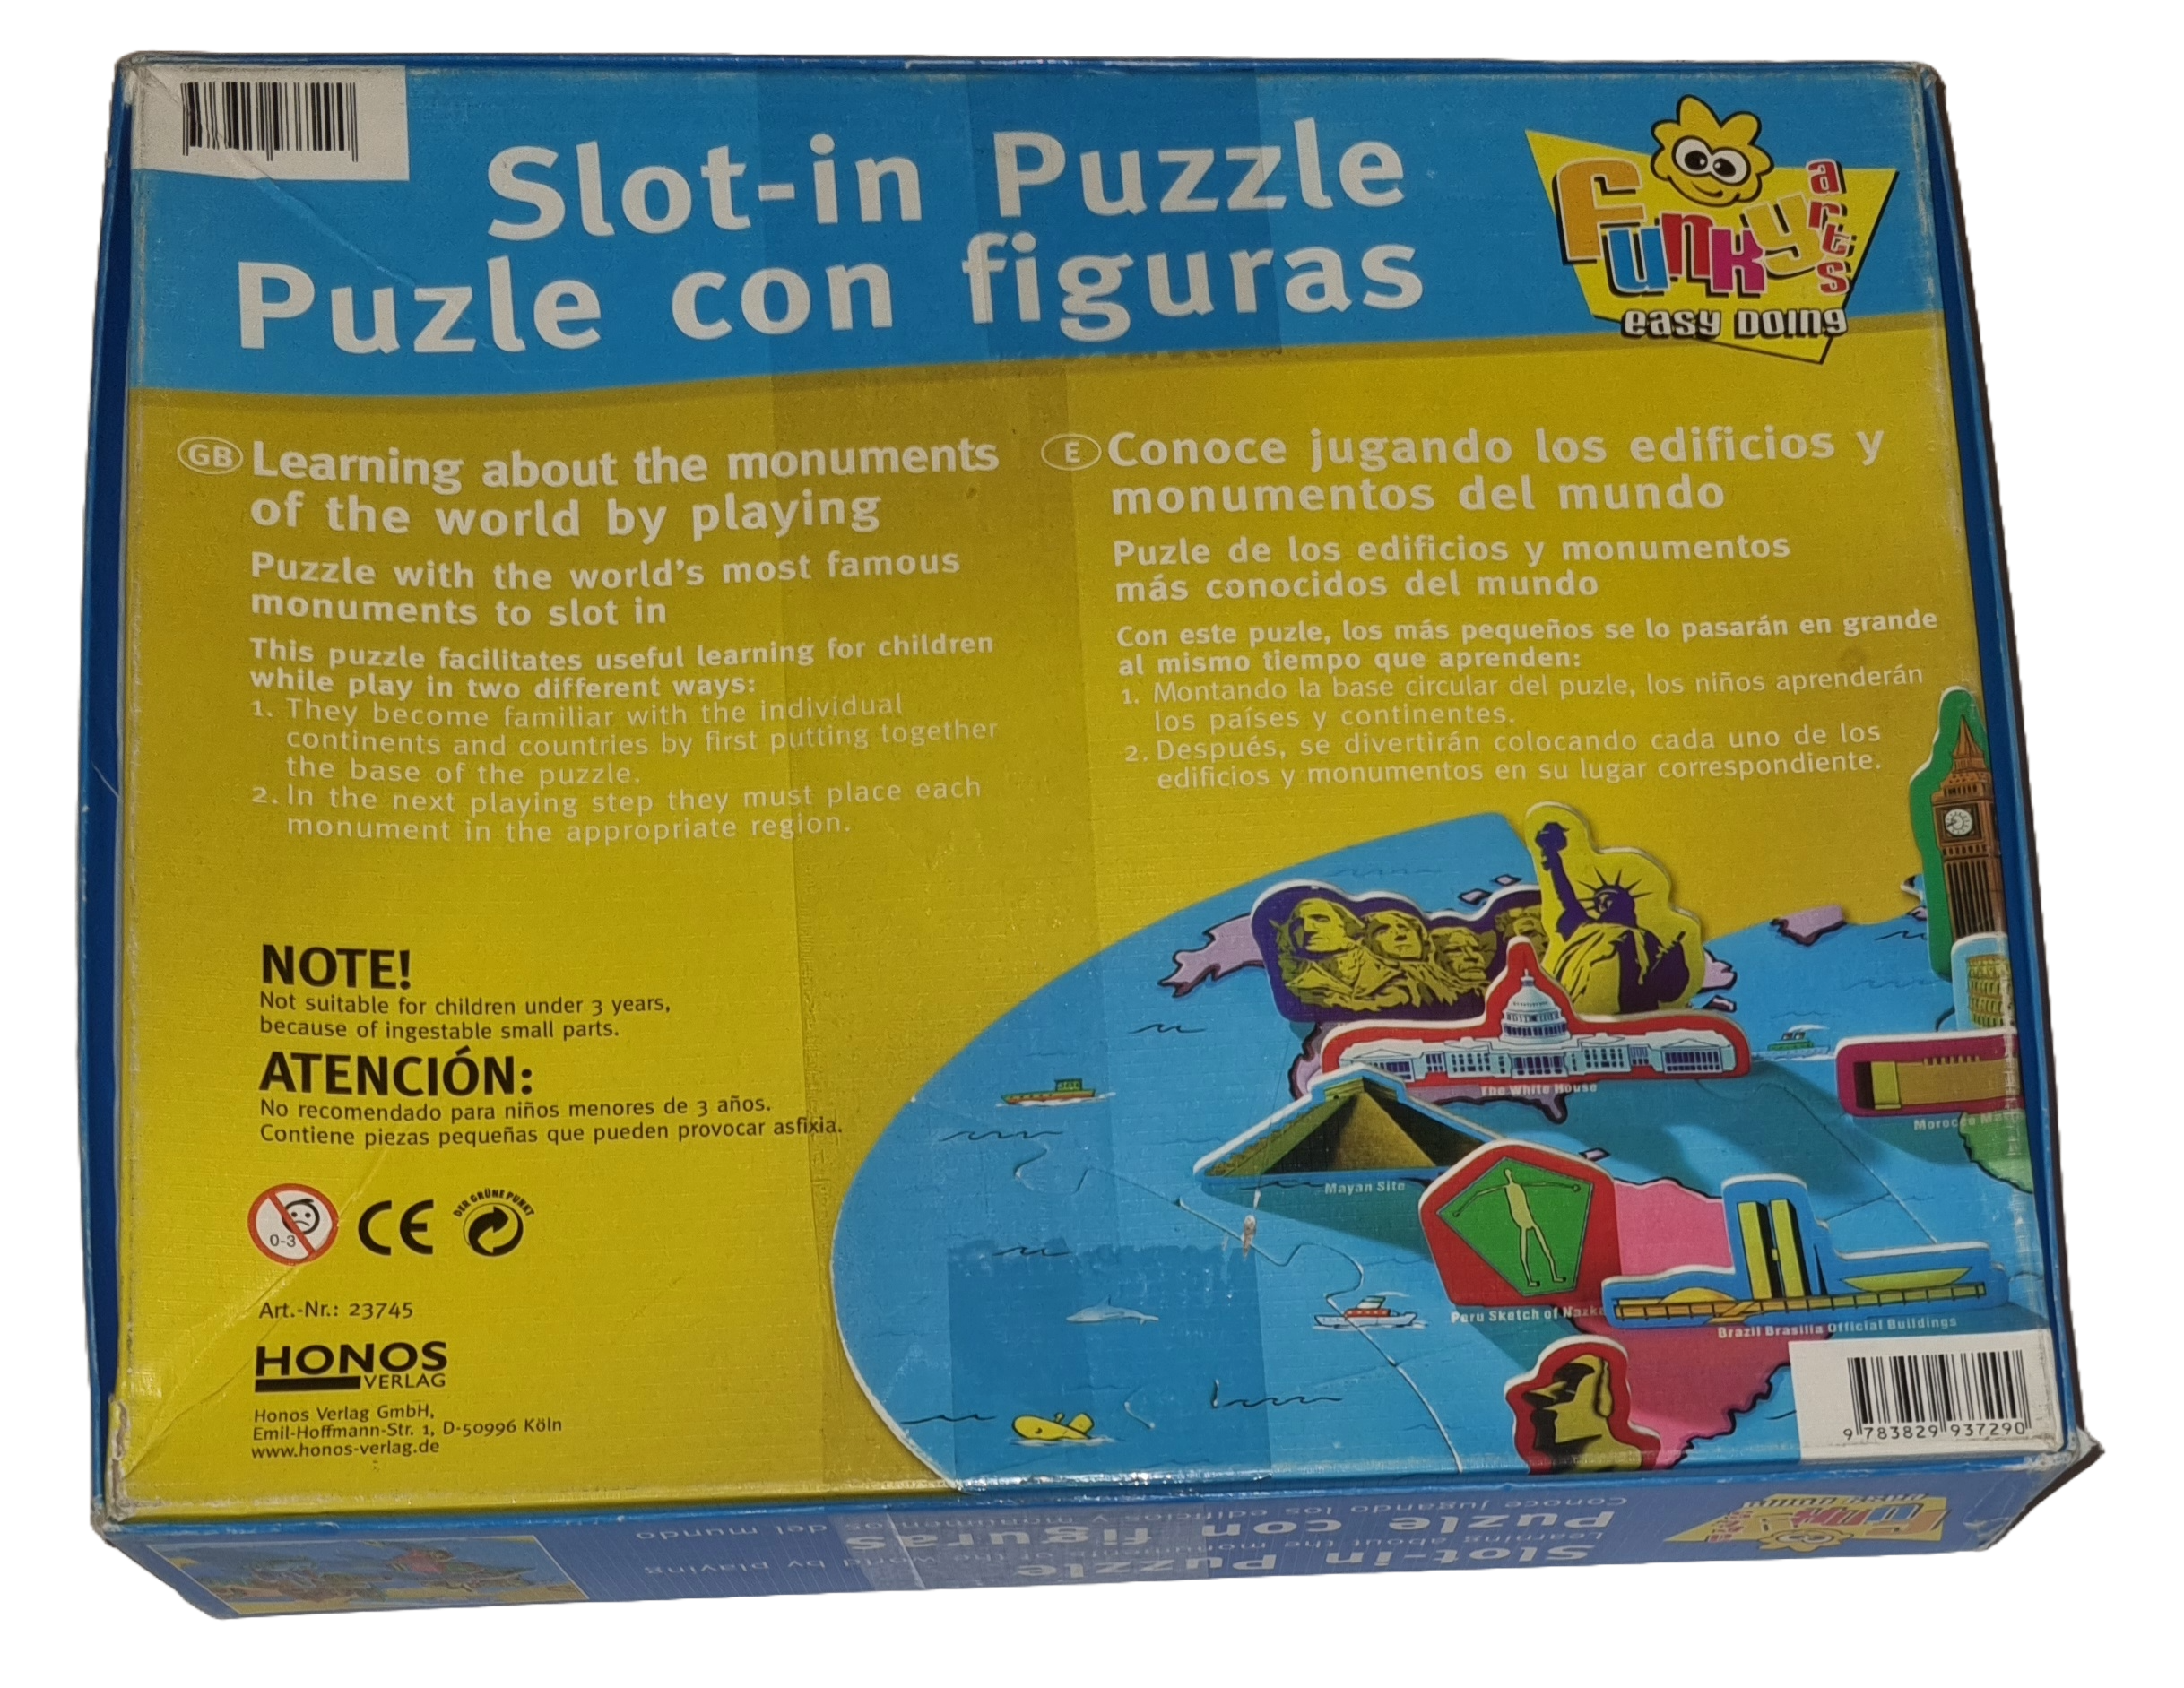 Honos Verlag Funky arts easy doing Slot-in Puzzle 42 Teile